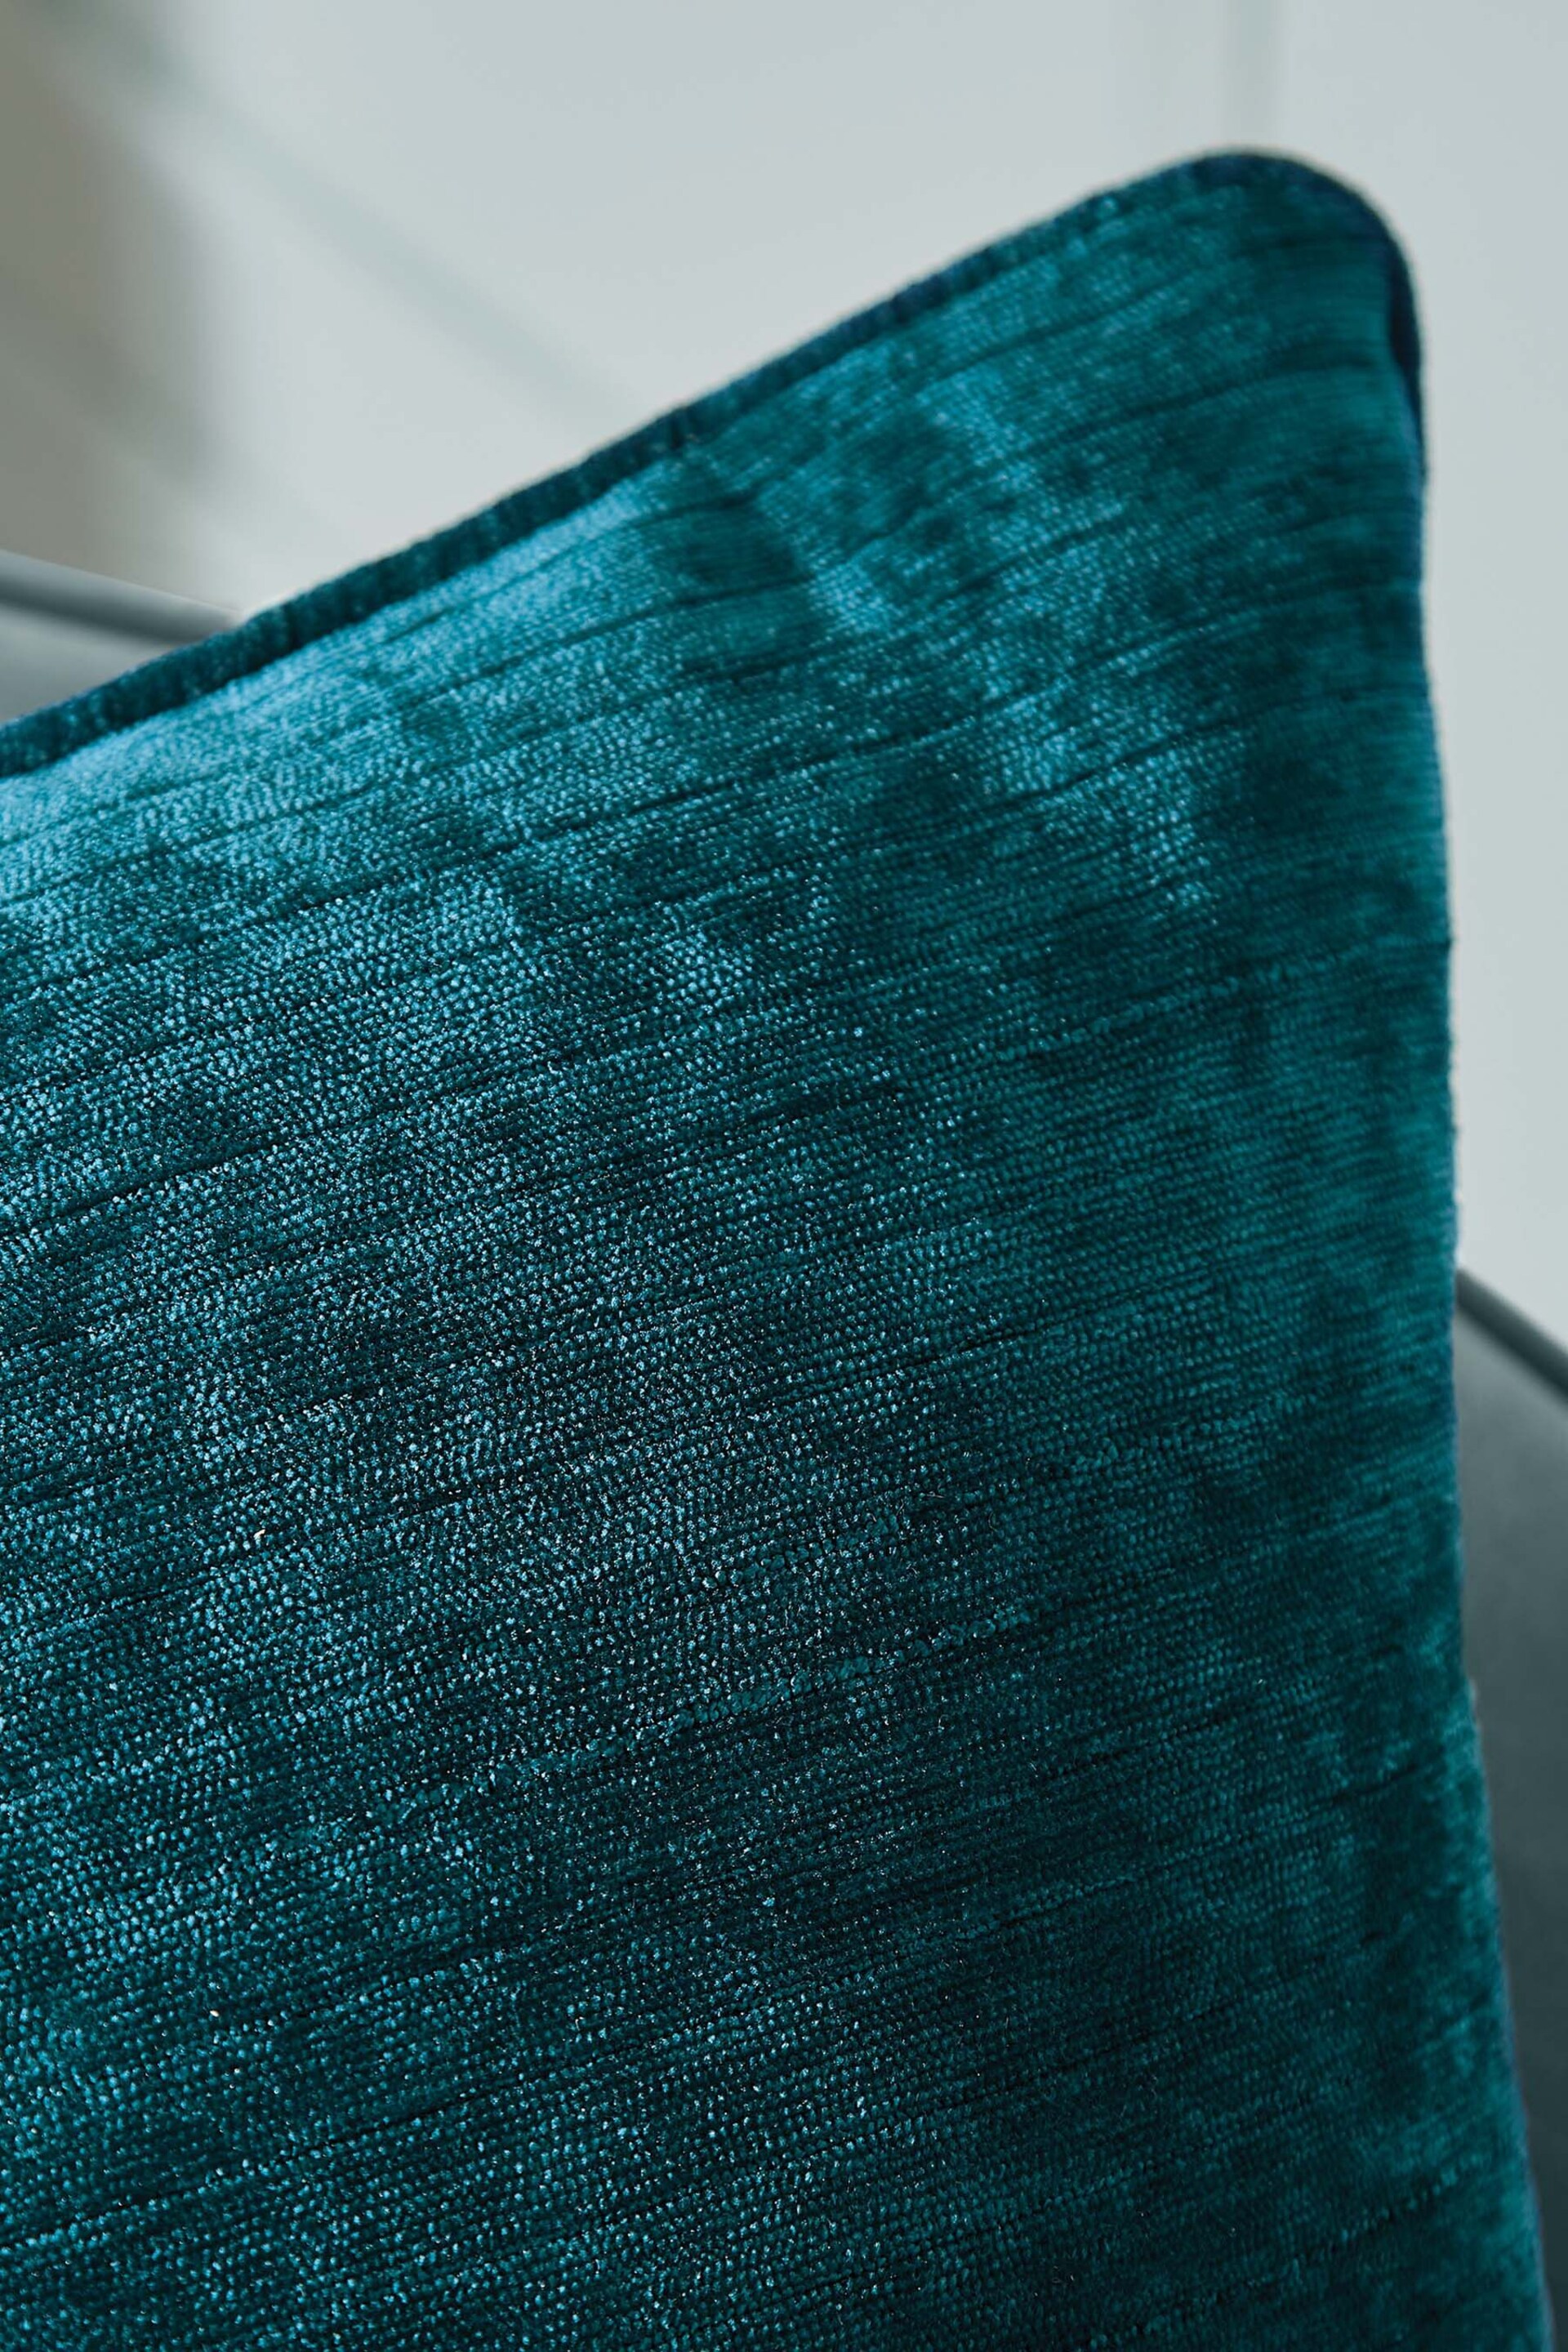 Hyperion Rich Teal Blue Selene Luxury Chenille Piped Cushion - Image 2 of 4